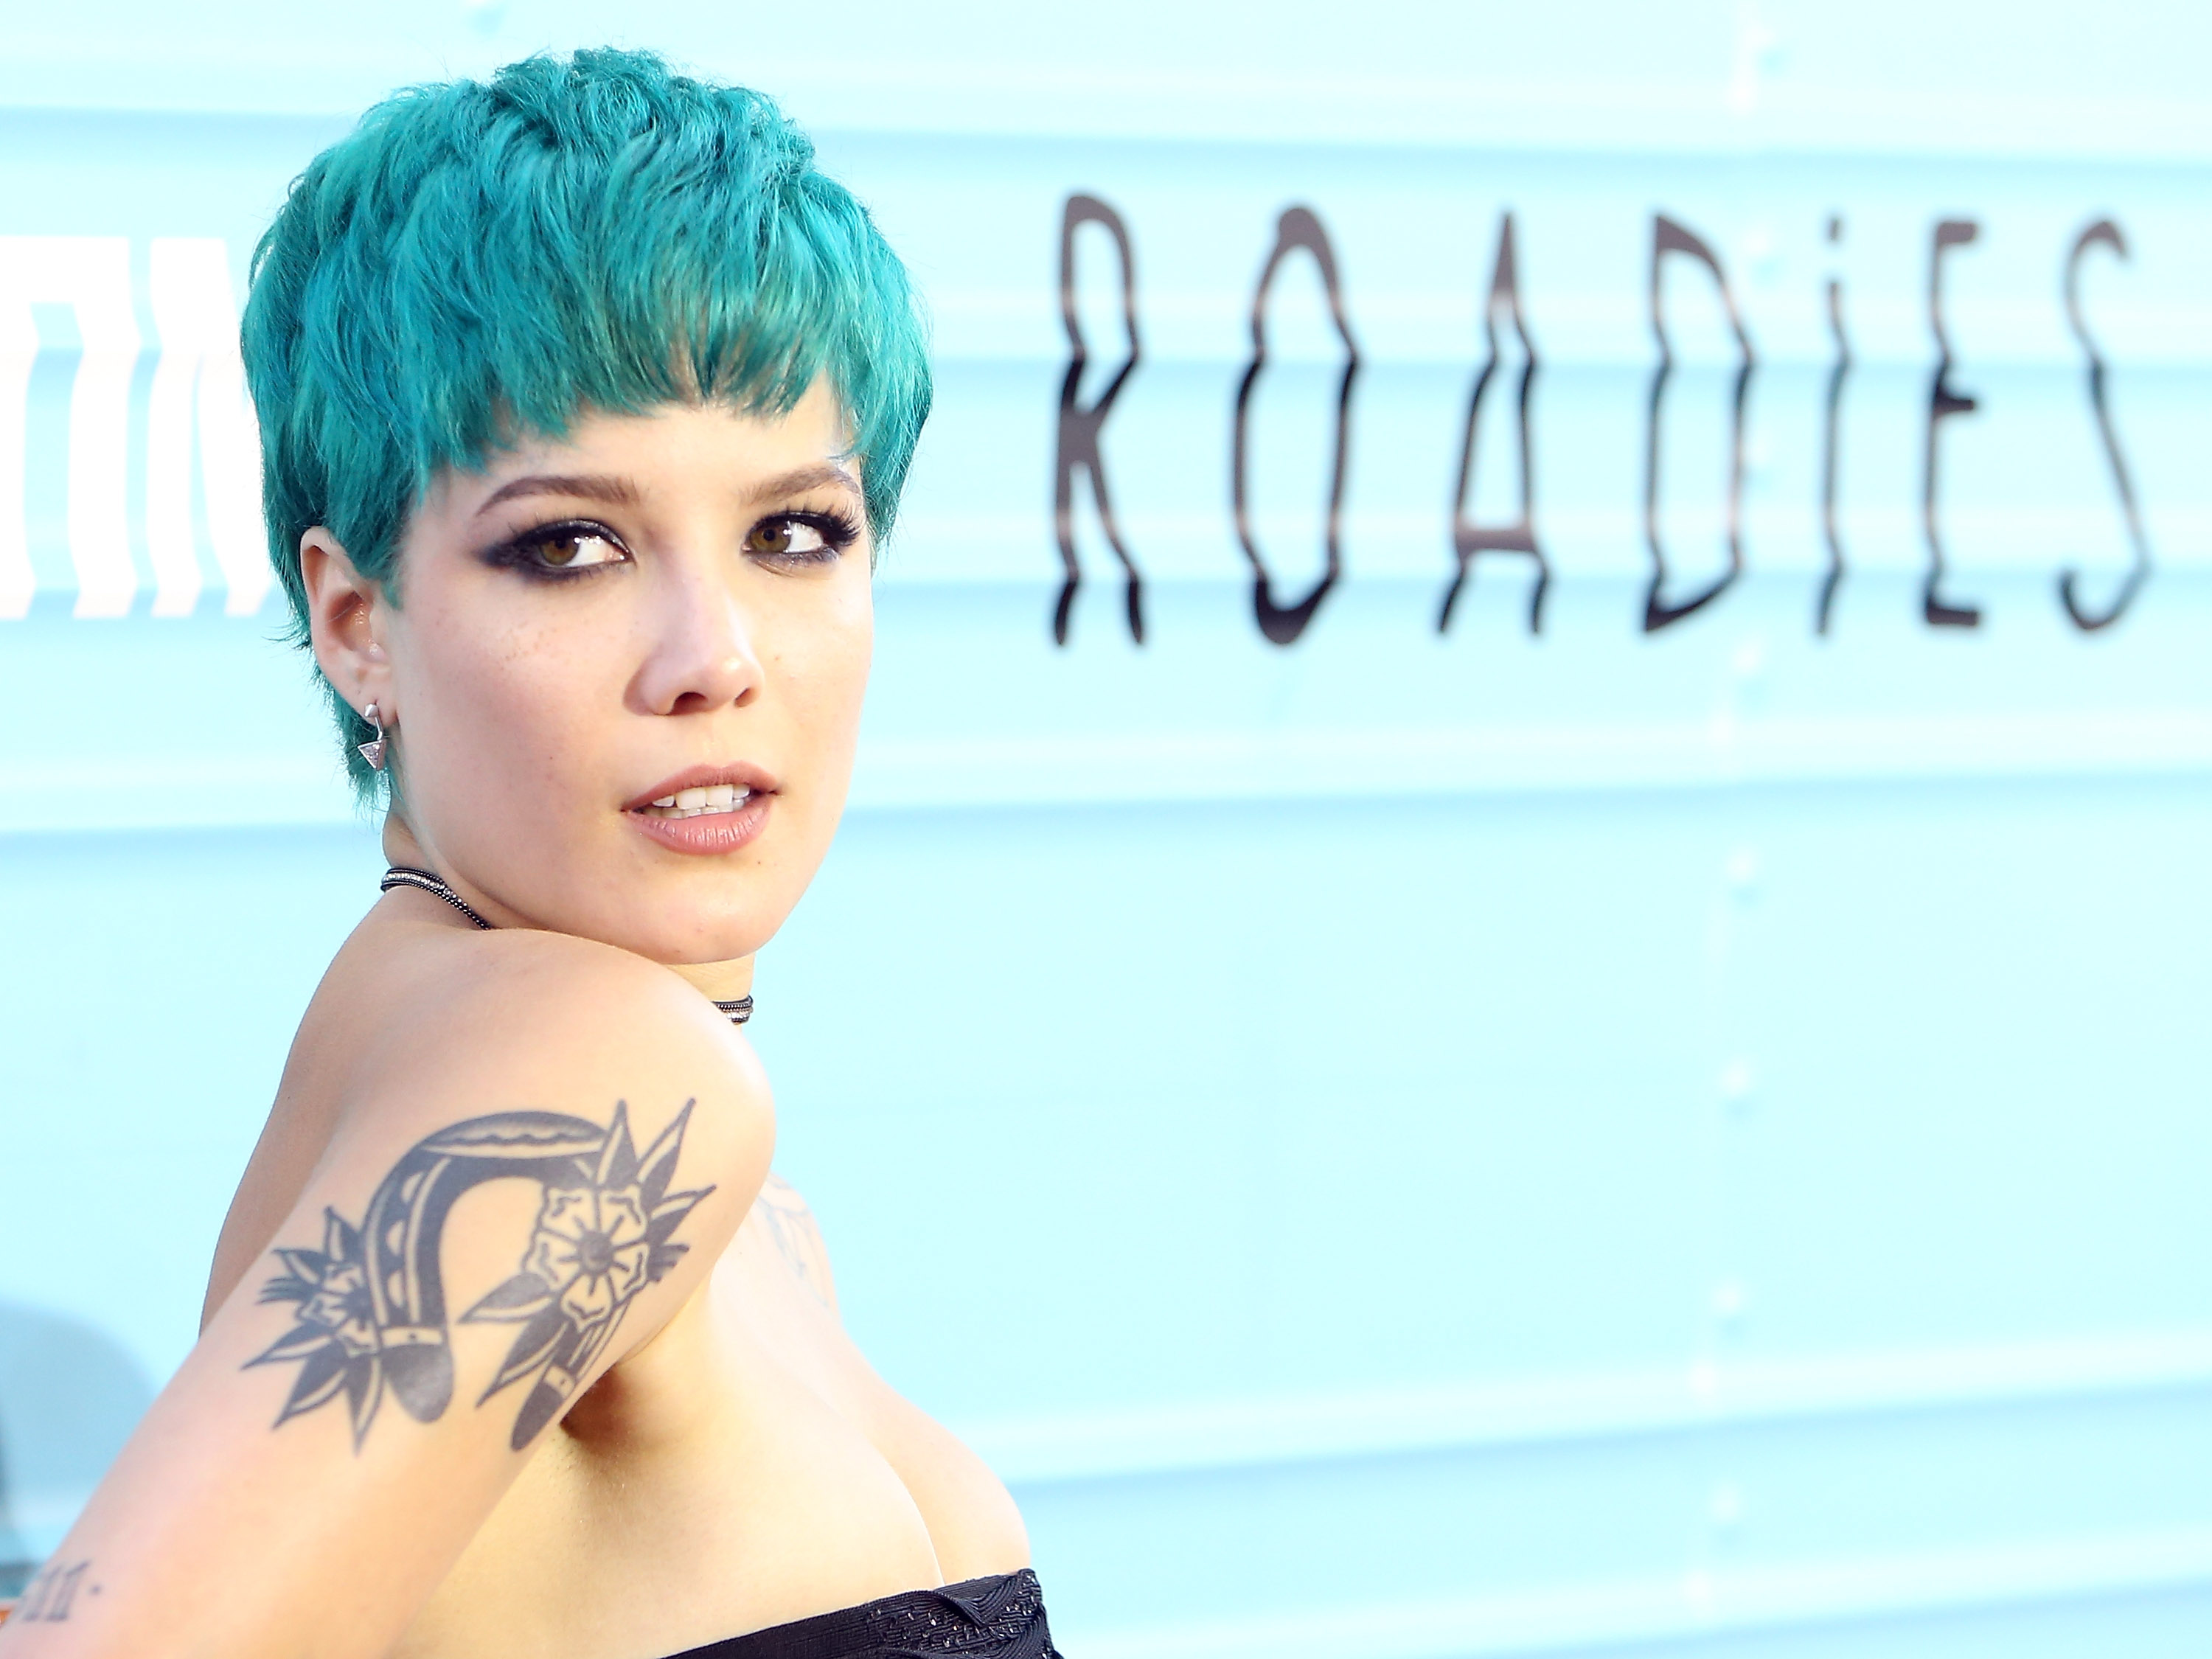 LOS ANGELES, CA - JUNE 06:  Ashley Nicolette Frangipane aka Halsey arrives at the Los Angeles premiere of Showtime's "Roadies" held at The Theatre at Ace Hotel on June 6, 2016 in Los Angeles, California.  (Photo by Michael Tran/FilmMagic) (Michael Tran&mdash;FilmMagic/Getty Images)